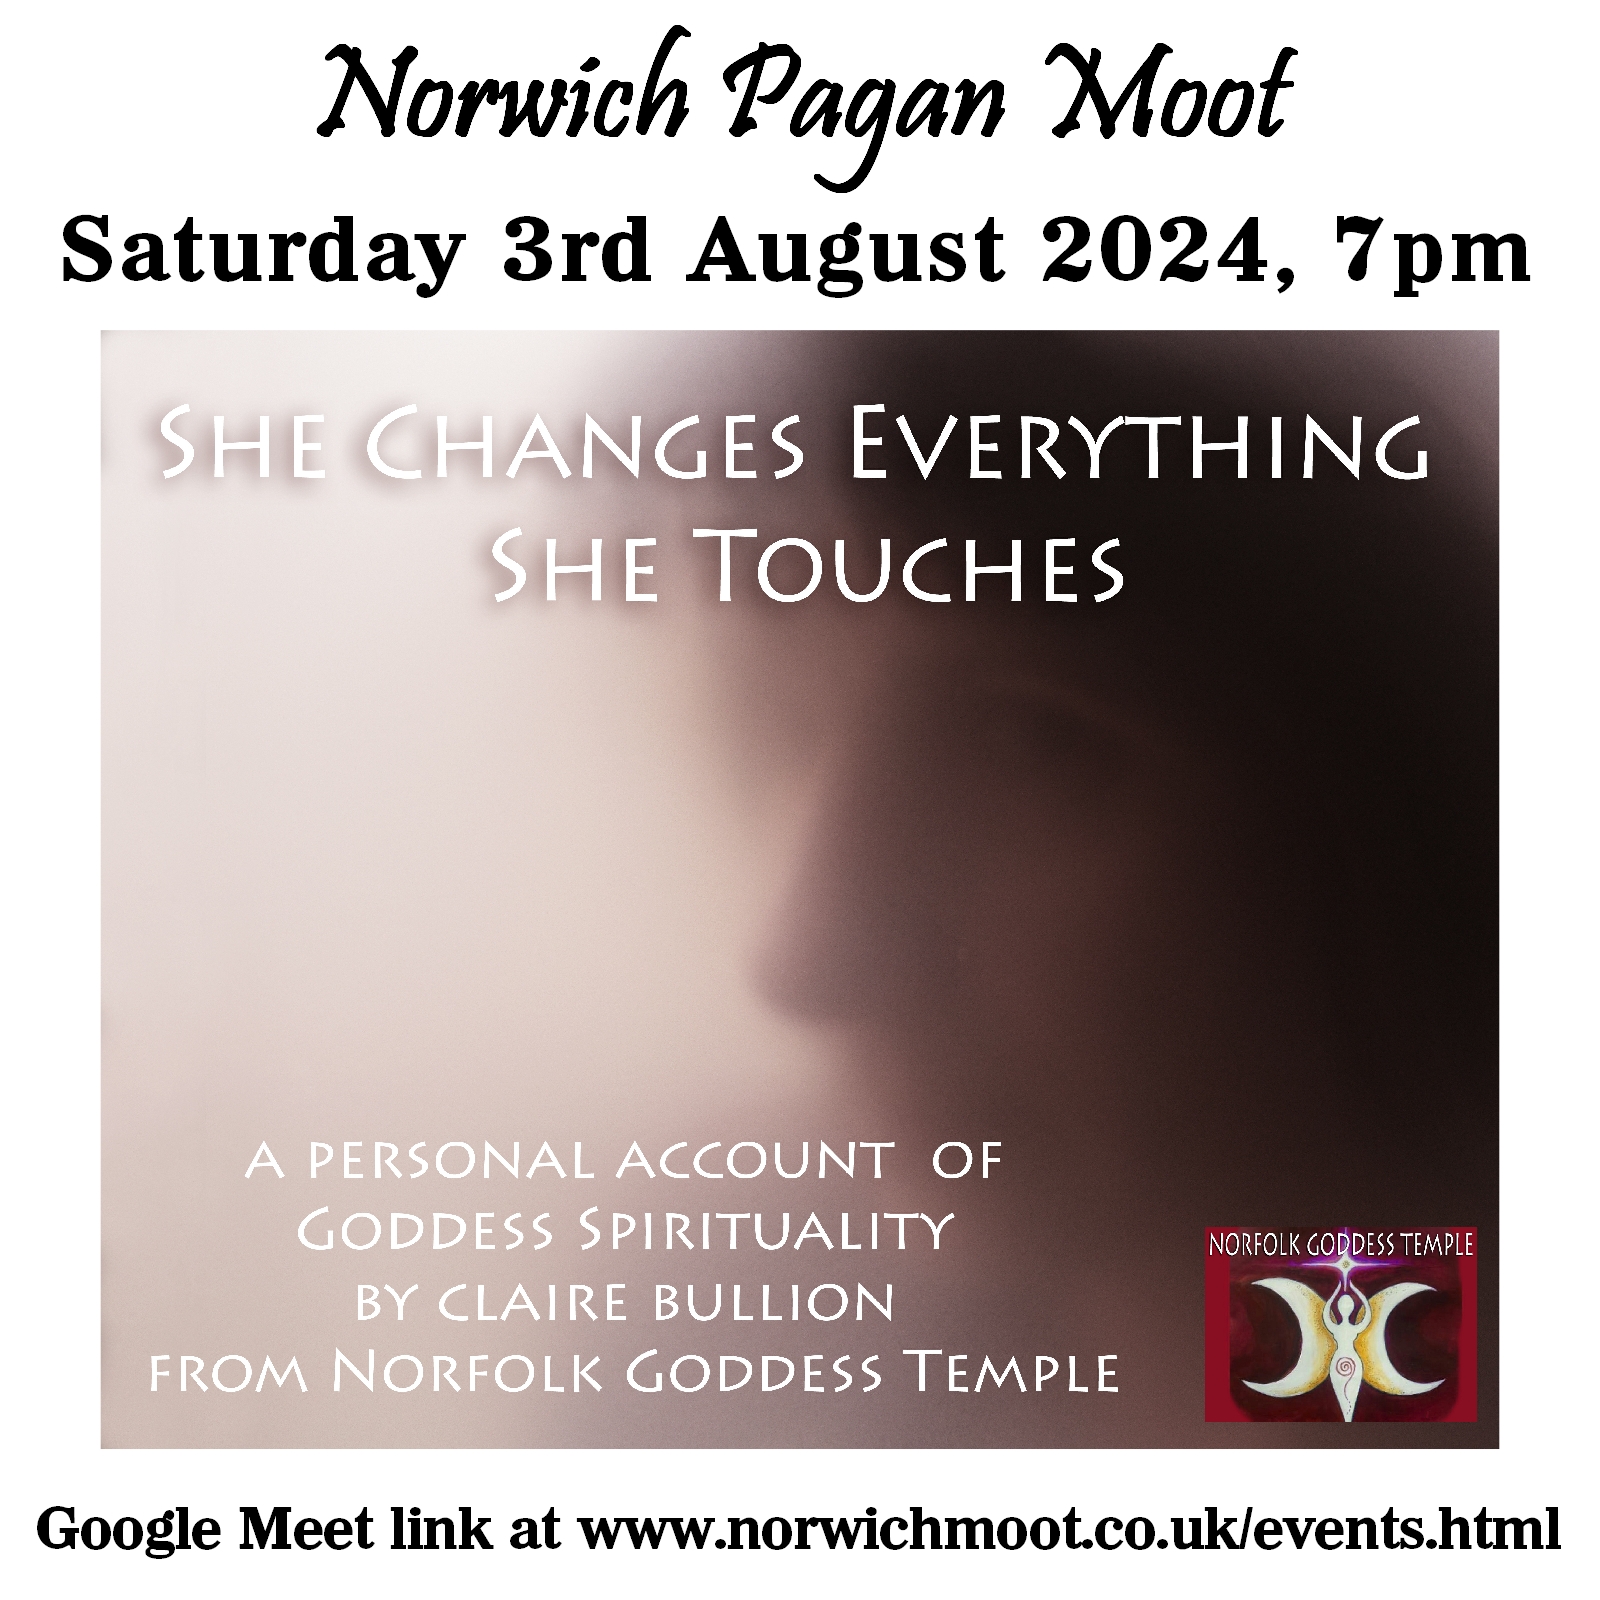 Image promoting the Norwich Moot on-line talk by Claire Bullion, 3rd August 2024, with an epherial image of a female face.